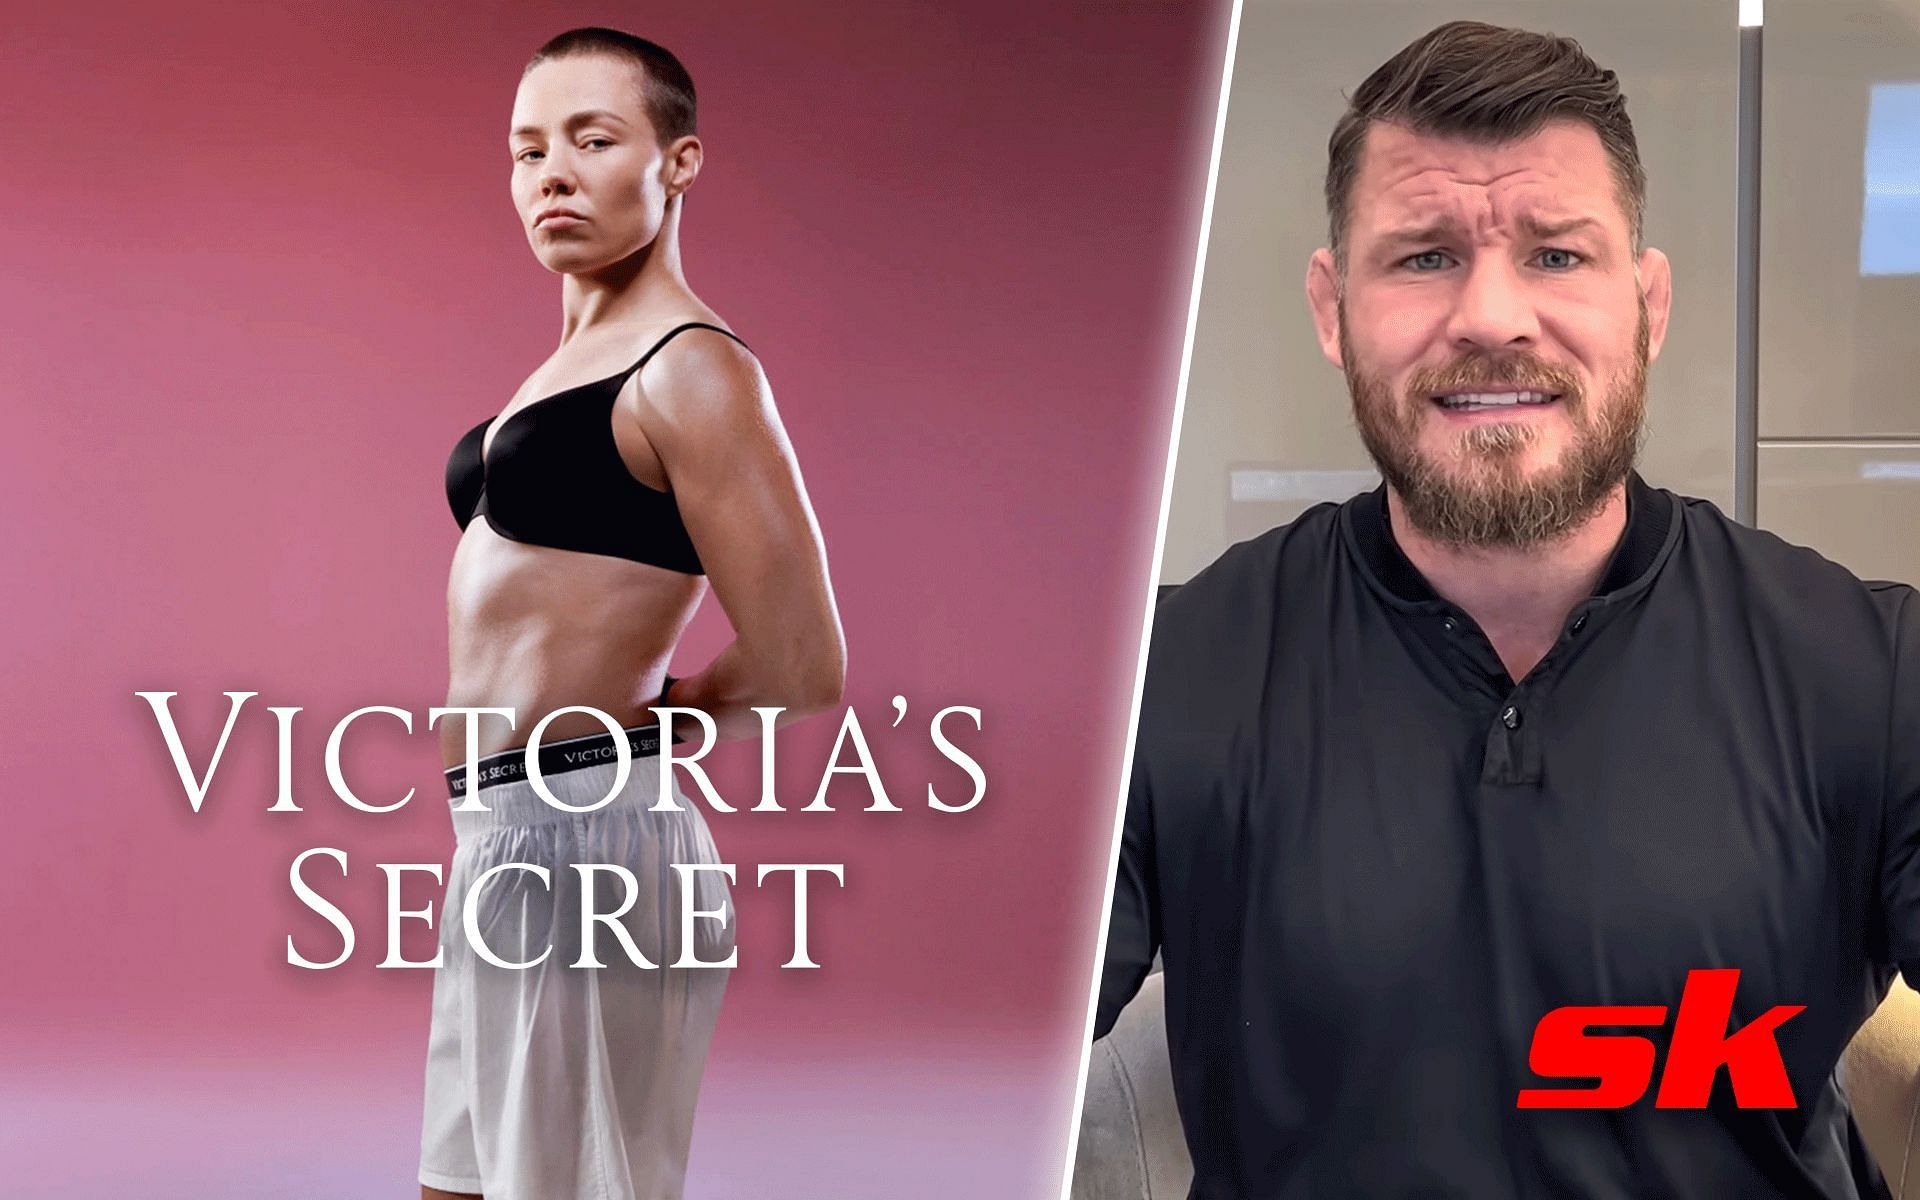 Rose Namajunas (left) &amp; Michael Bisping (right) [Photo credit: rollingstone.com | Michael Bisping Podcast on YouTube]